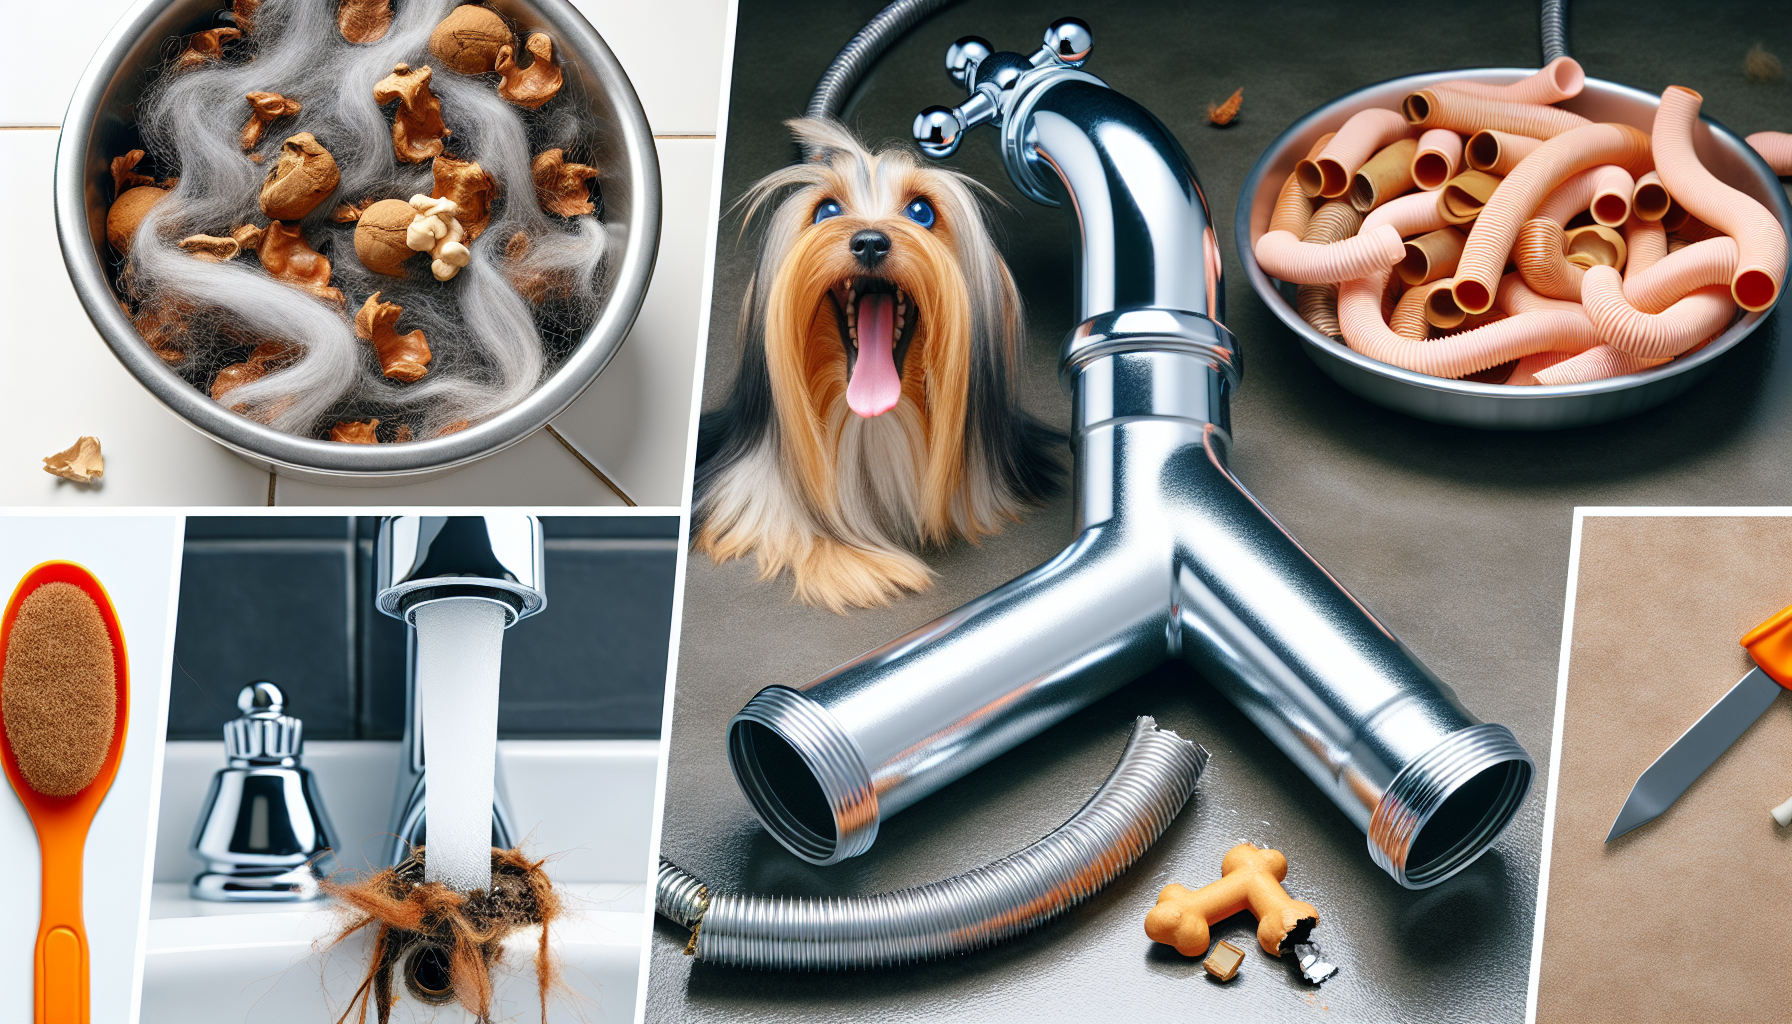 Plumbing Tips For Pet Owners And Animal Facilities